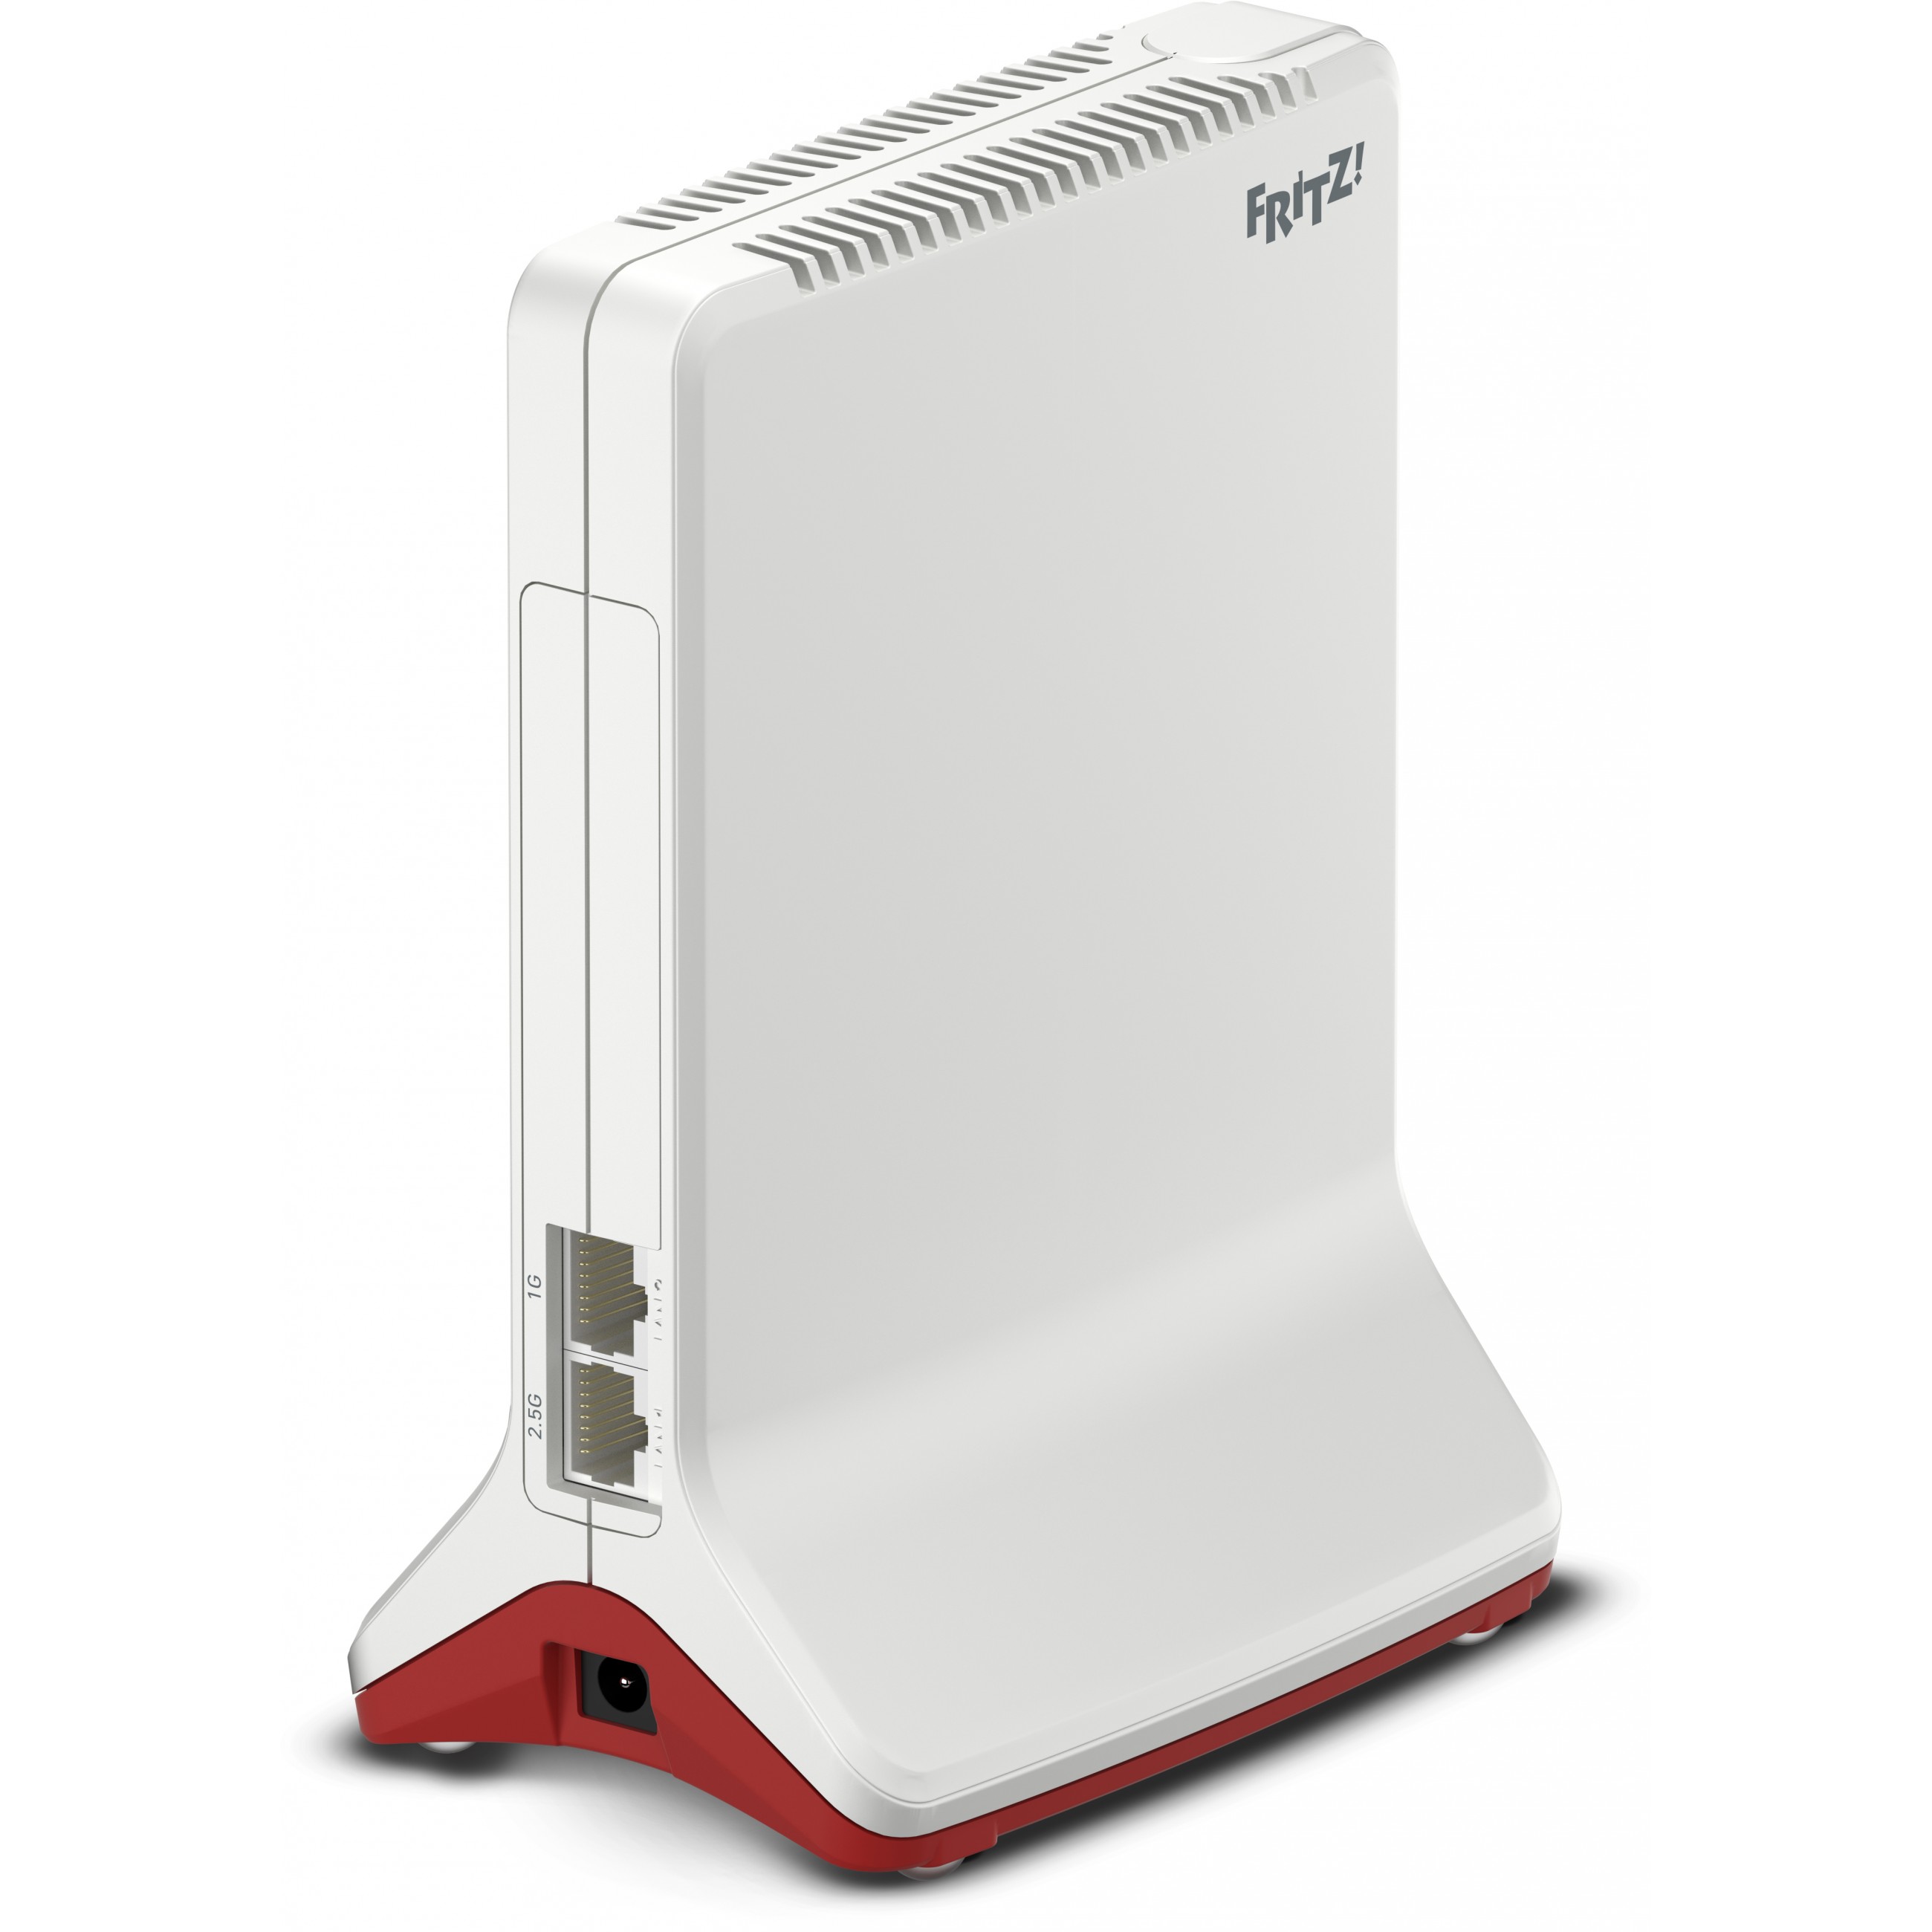 FRITZ!Repeater 6000 WLAN-Router Ethernet Tri-Band (2,4 GHz / 5 GHz / 5 GHz) Rot, Weiß